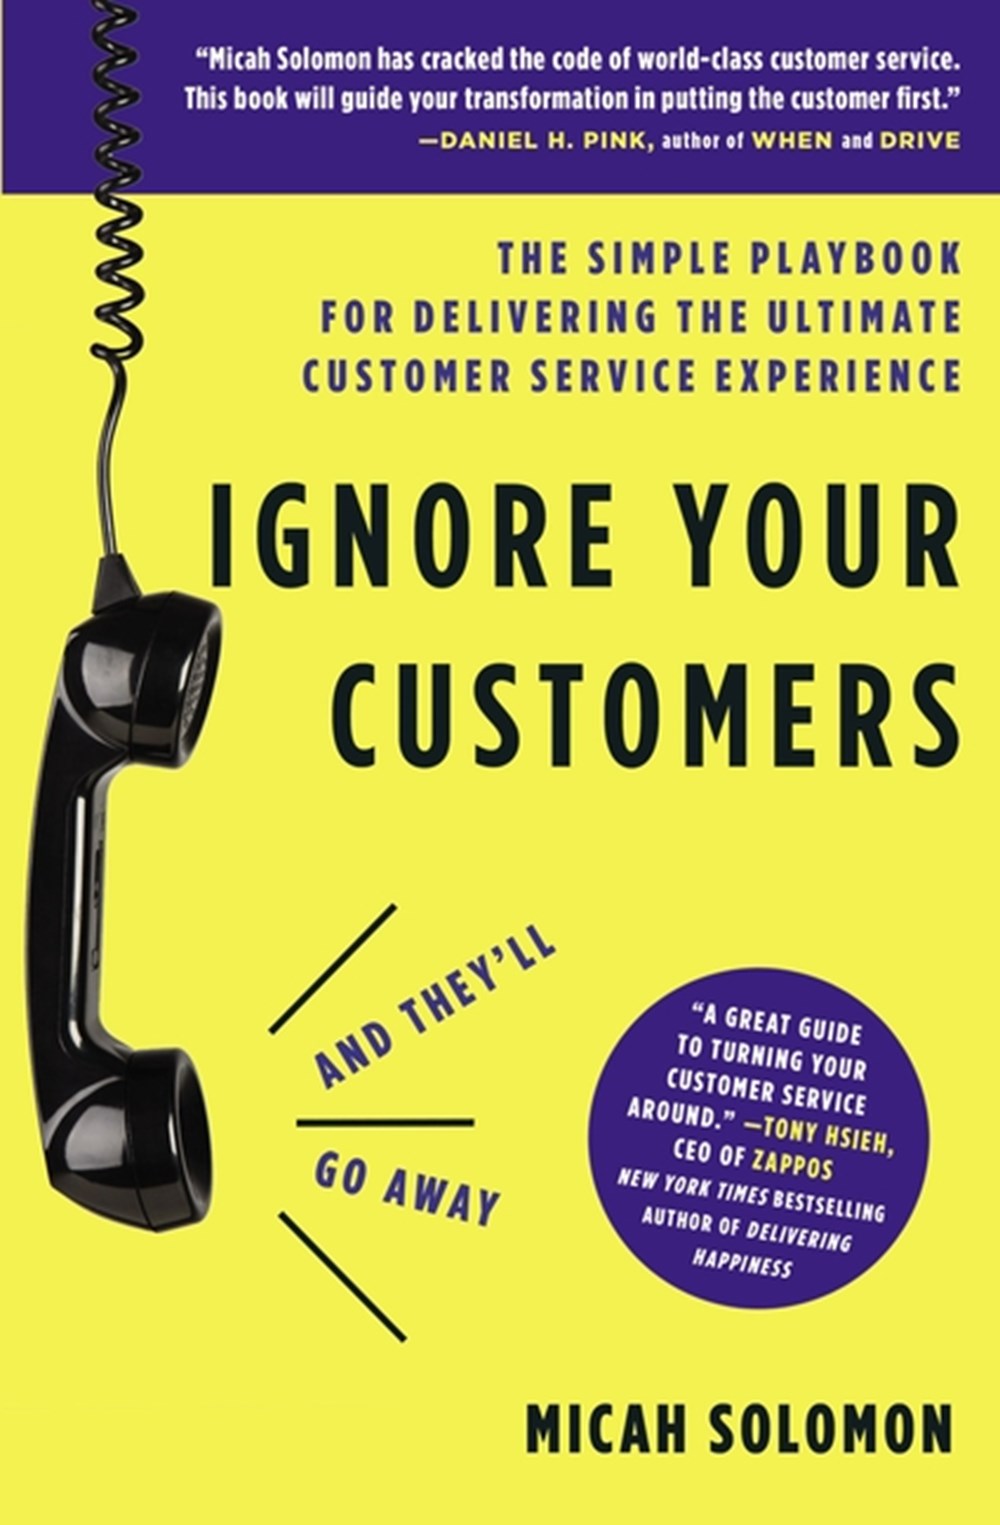 Ignore Your Customers (and They'll Go Away) The Simple Playbook for Delivering the Ultimate Customer